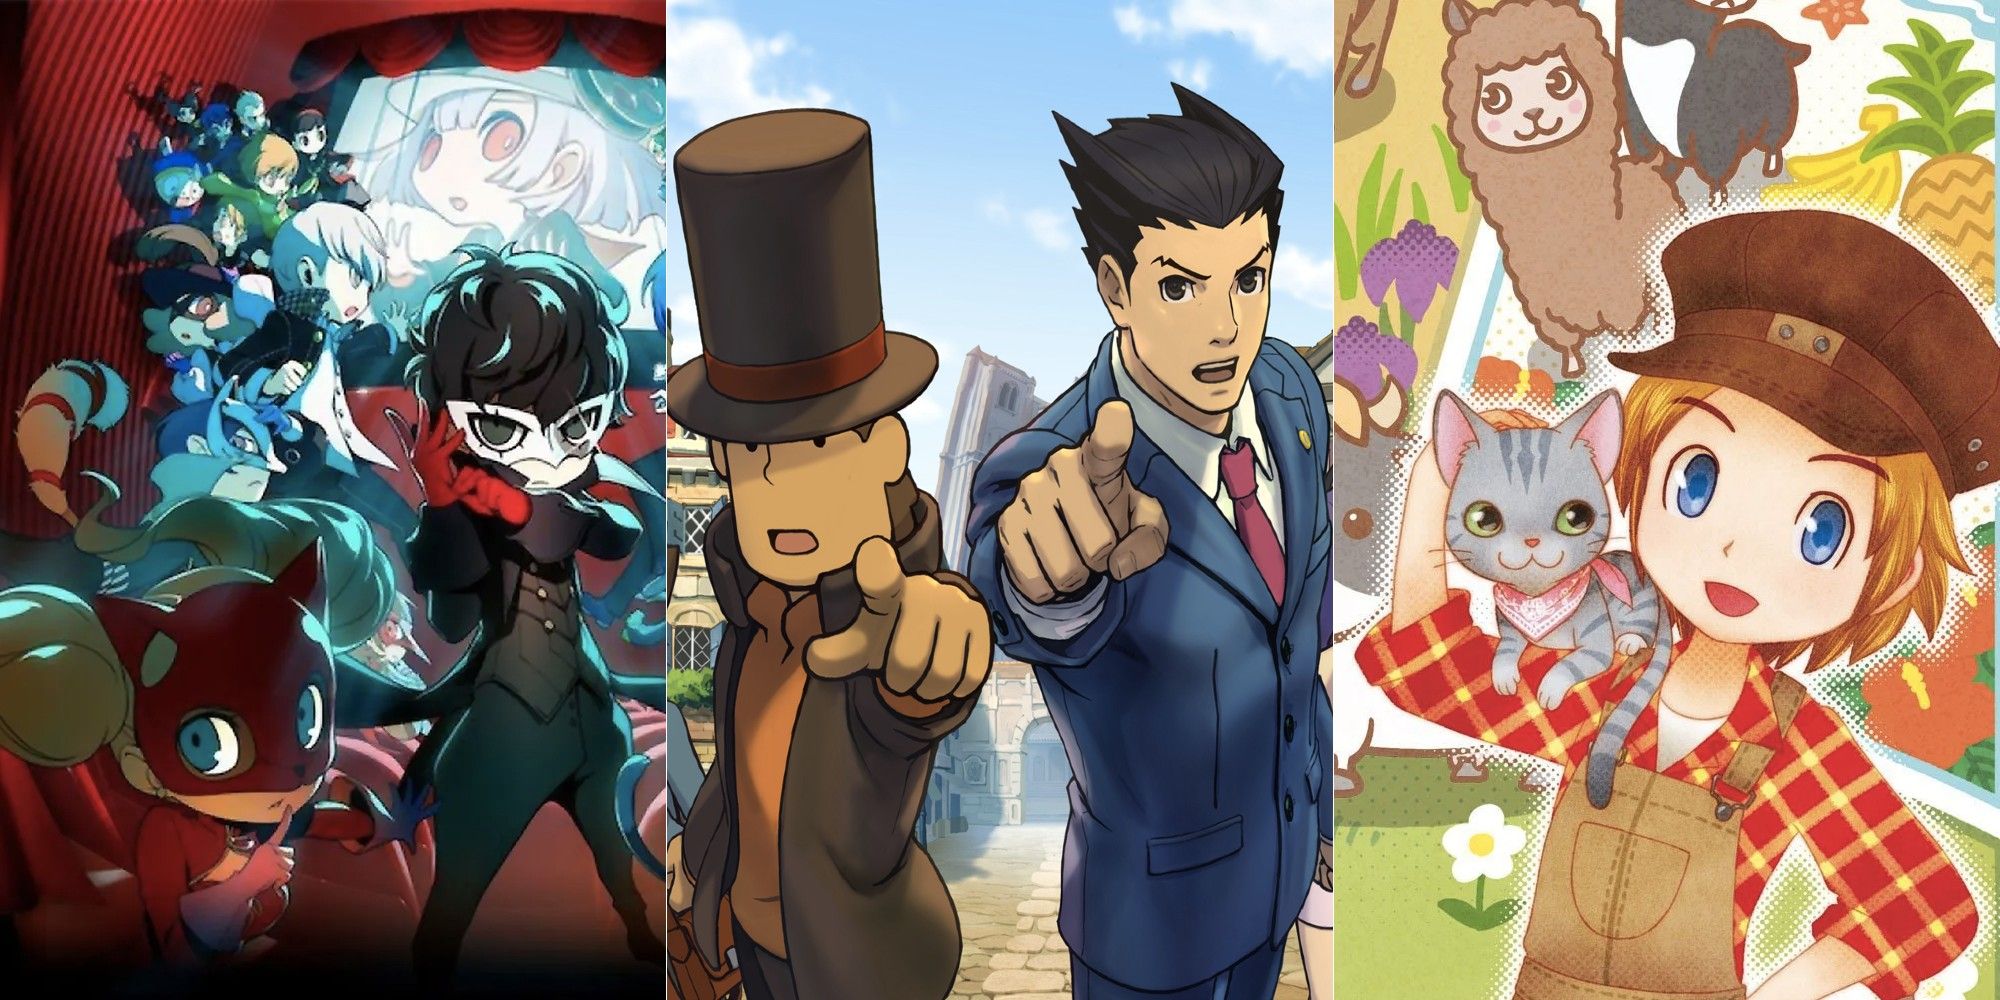 From left to right: Persona Q2 characters, Phoenix Wright and Professor Layton, Story of Seasons: ToT male protagonist.